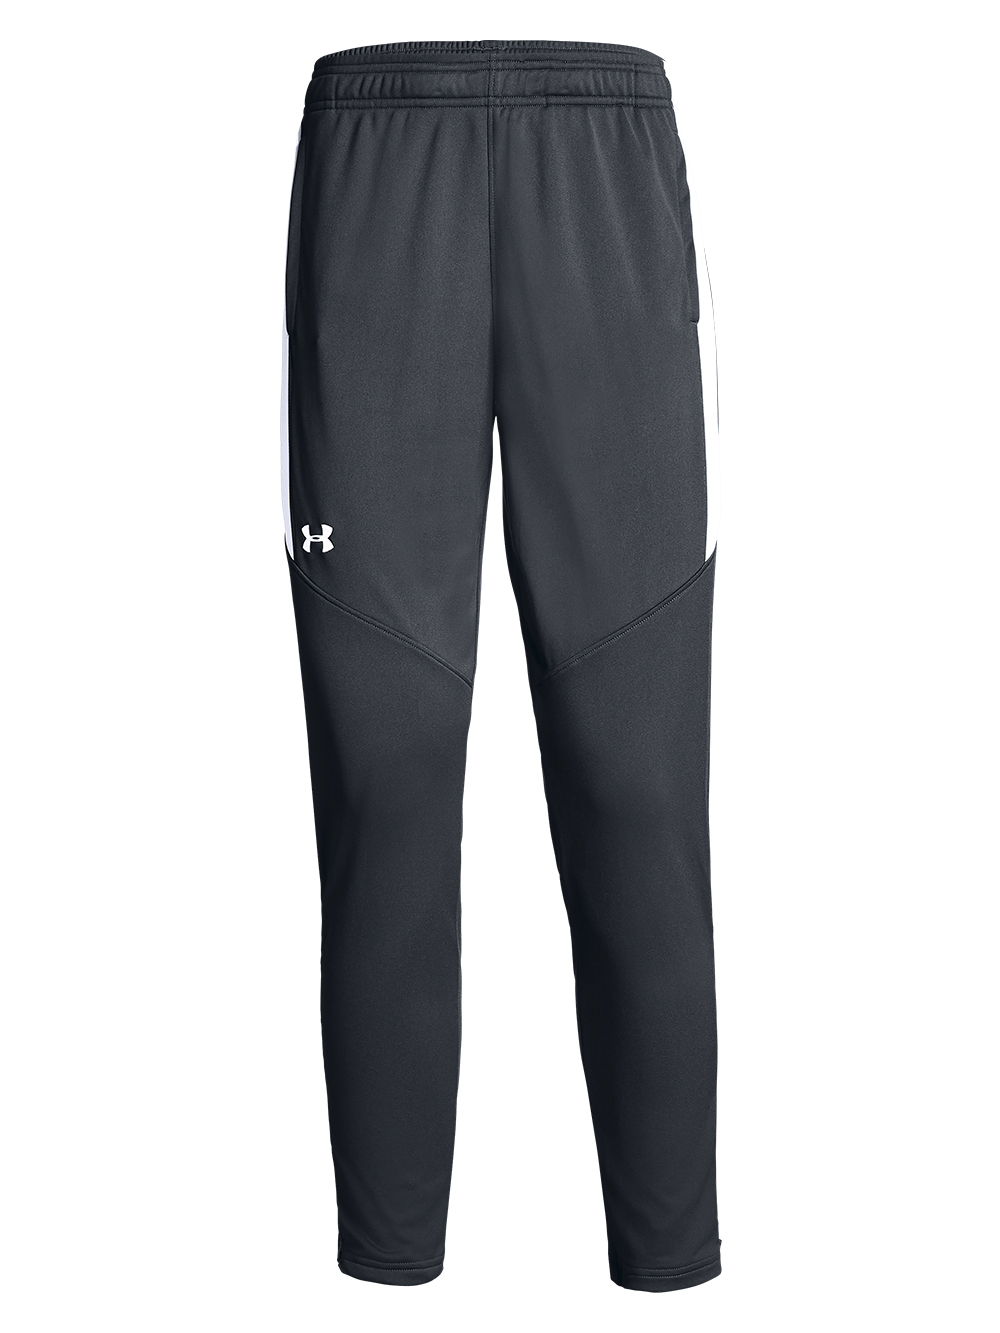 under armour womens pants tall